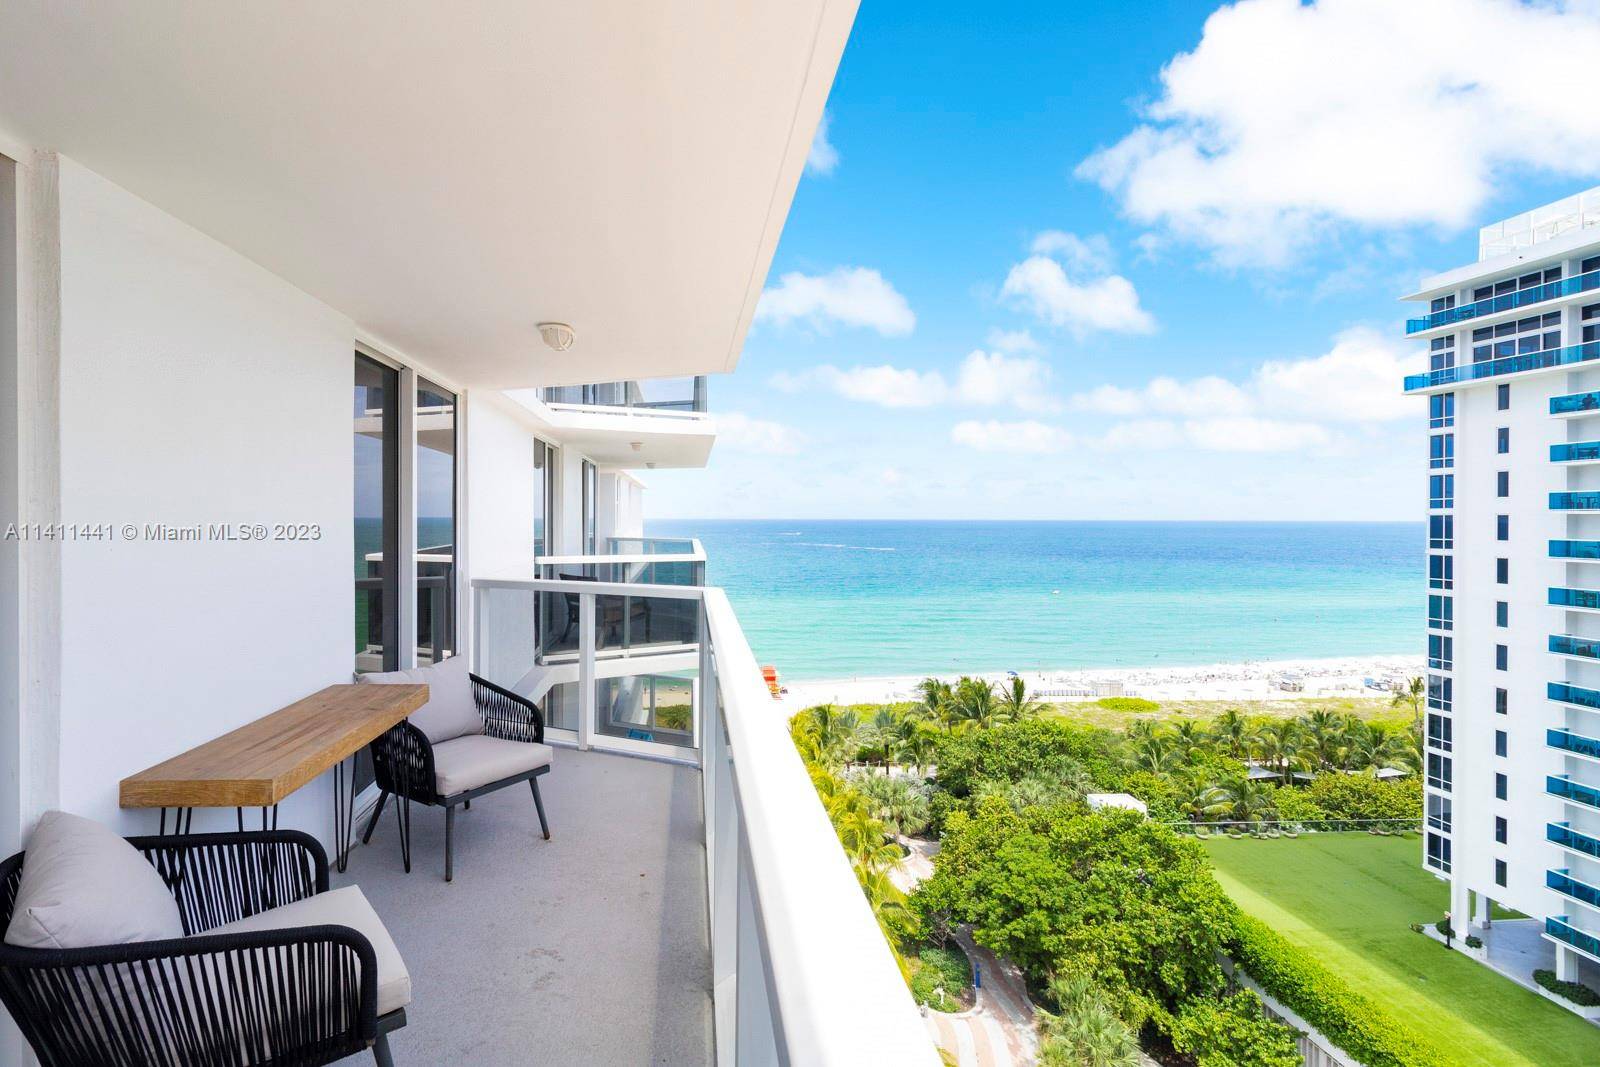 This extraordinary condo at the Riviera on Miami Beach has been meticulously renovated.